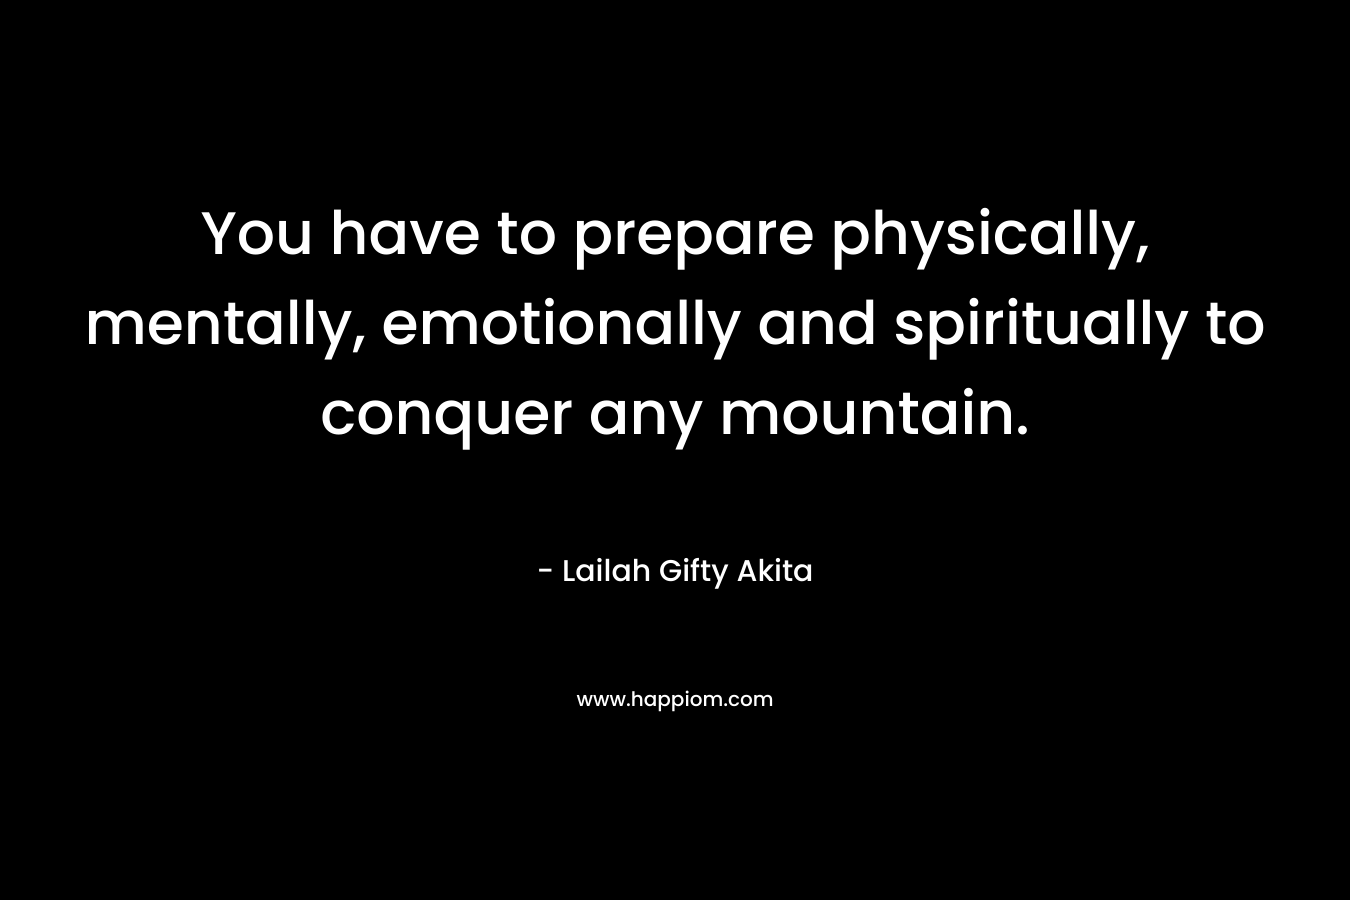 You have to prepare physically, mentally, emotionally and spiritually to conquer any mountain.